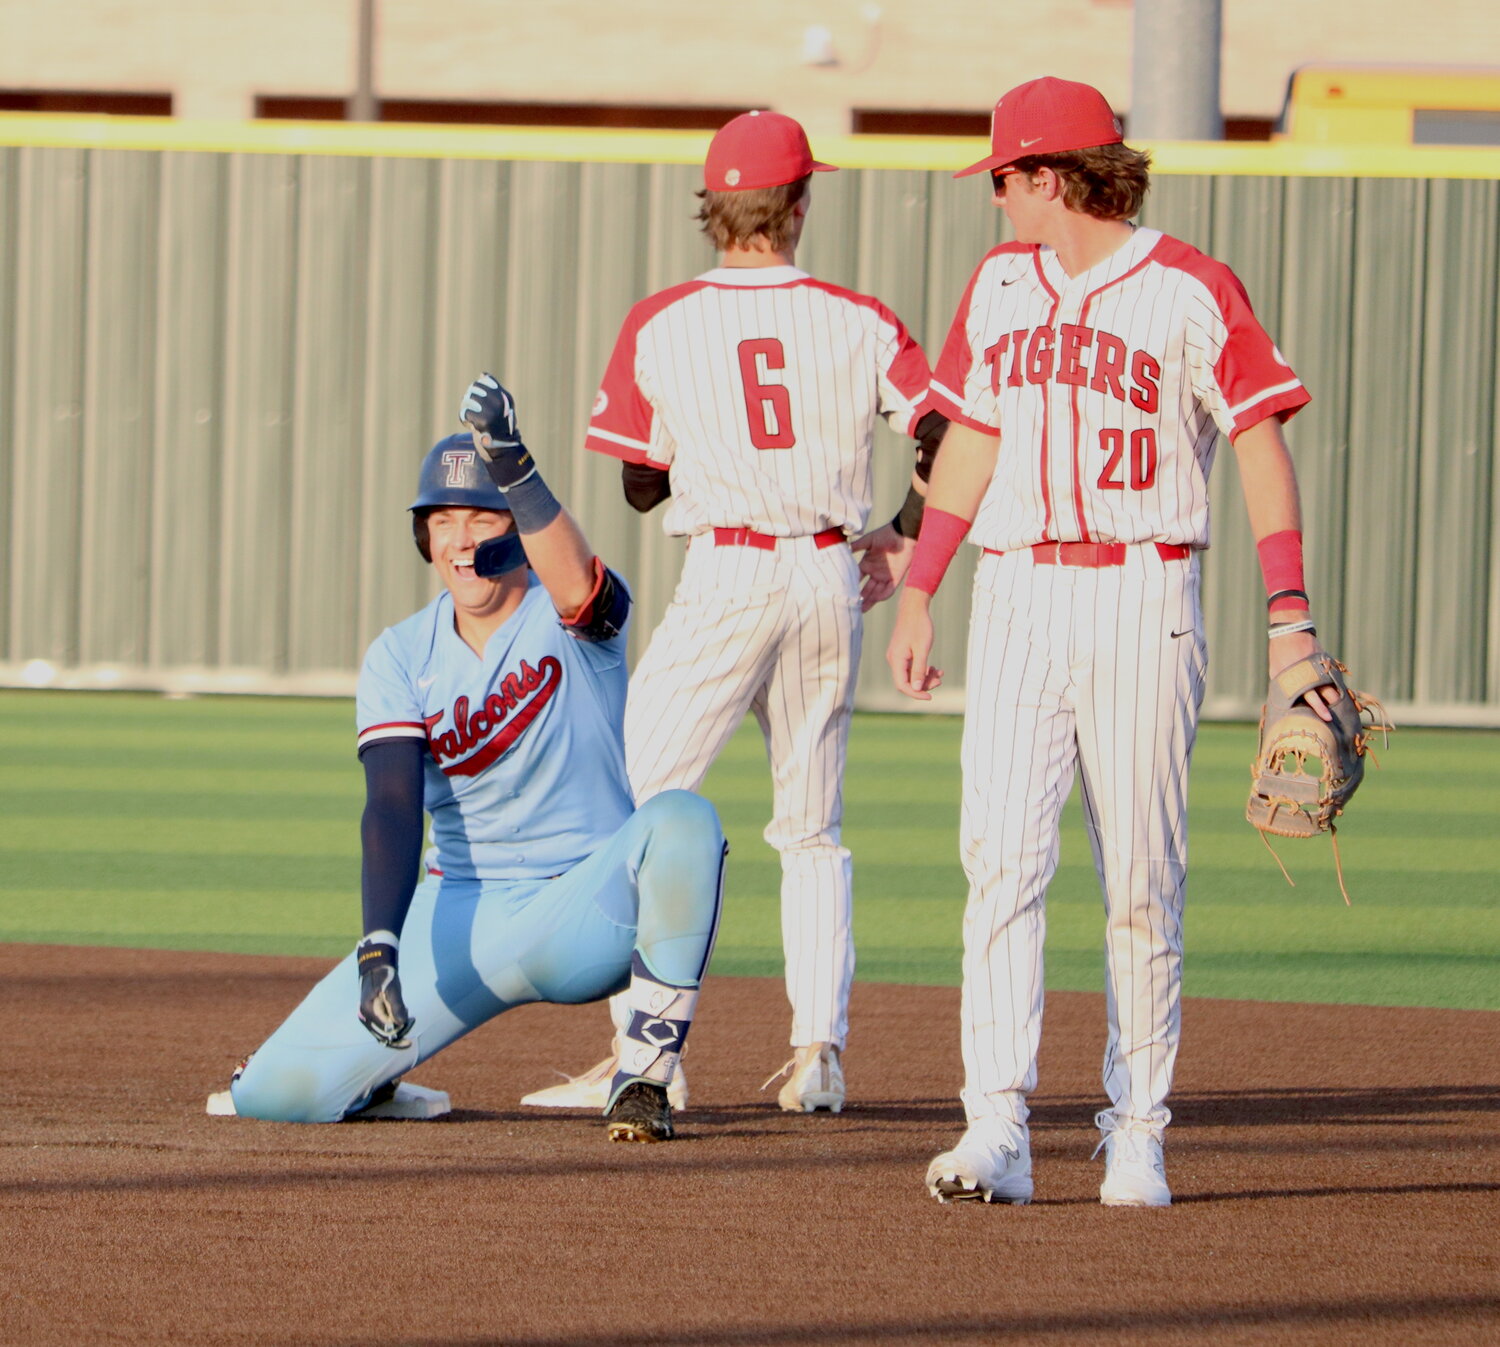 Landon West celebrates after hitting a two-run double during Thursday's Regional Quarterfinal game between Katy and Tompkins at Cy-Springs.